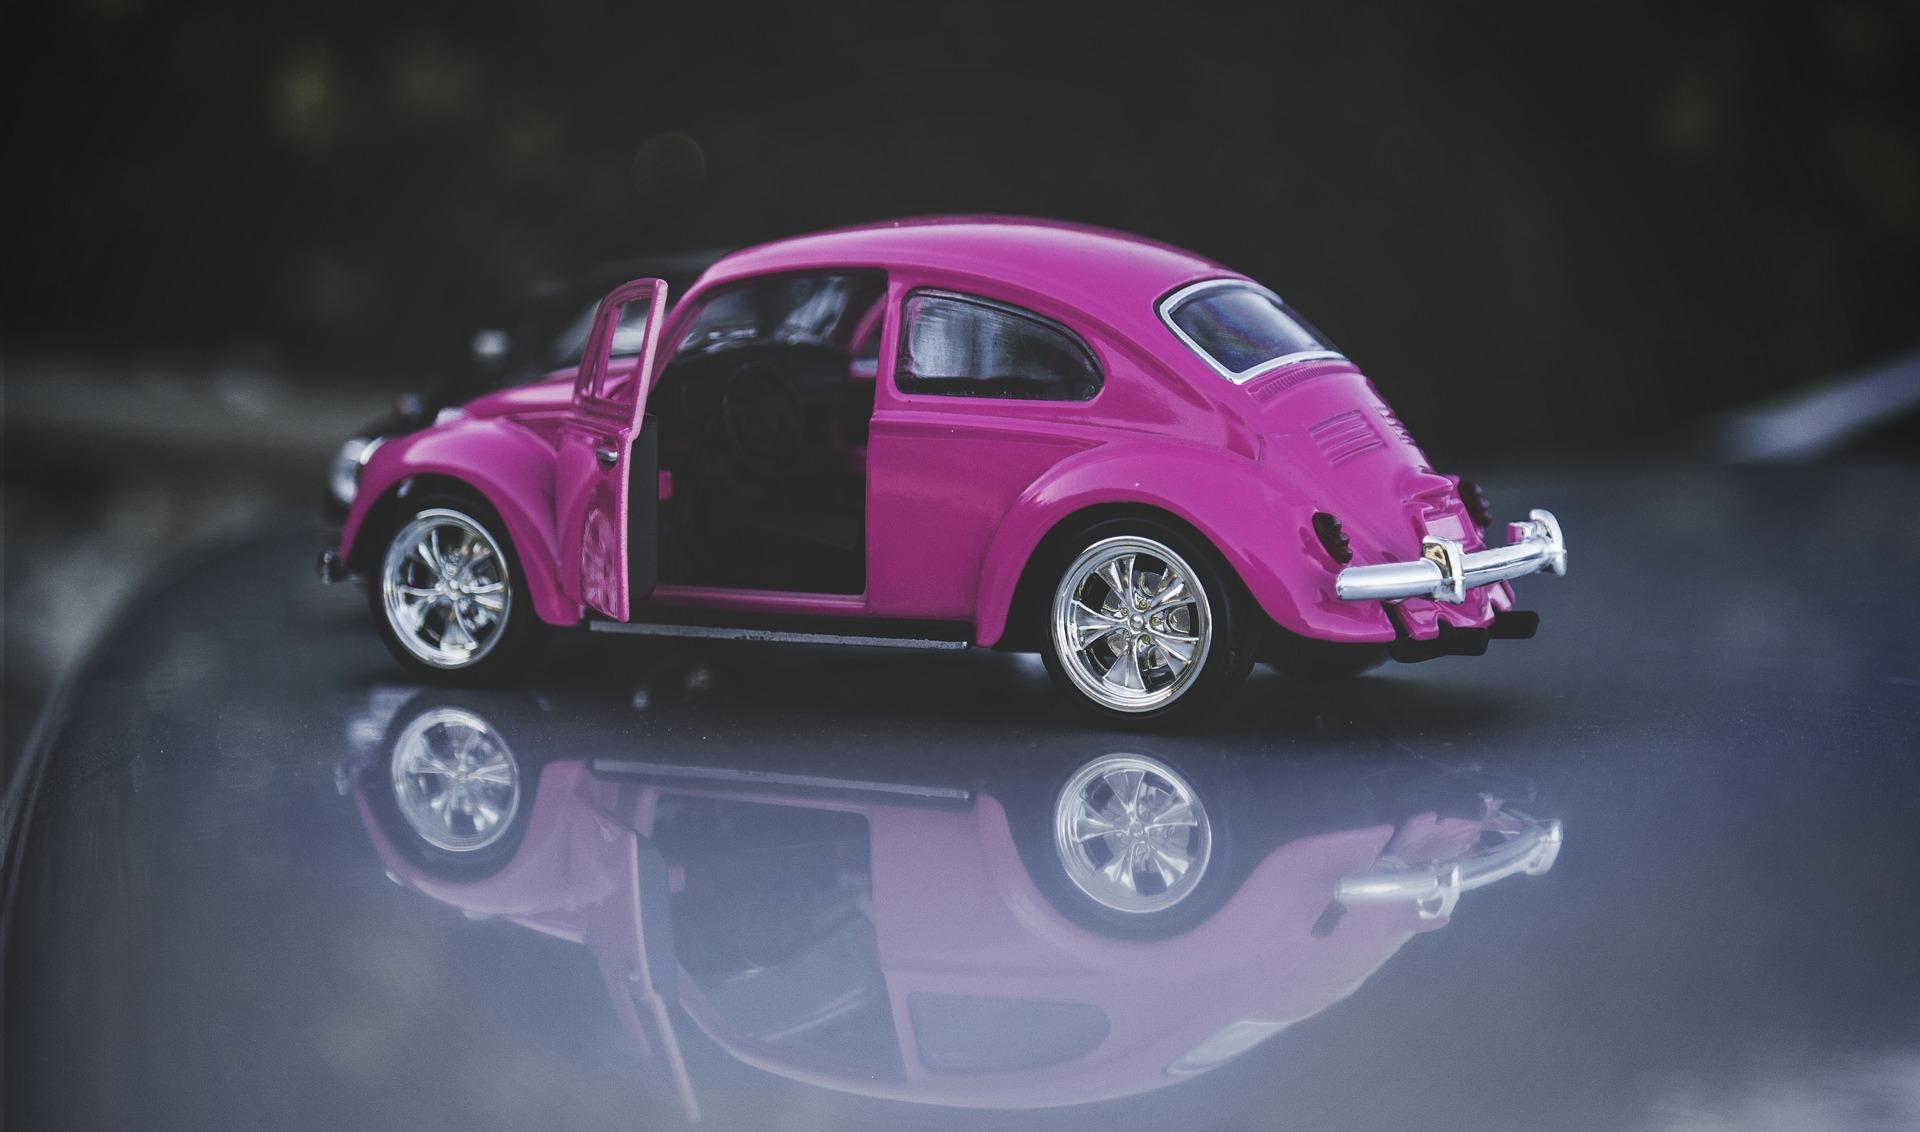 VW created a real-life Barbie car to help celebrate the doll’s 50th birthday.